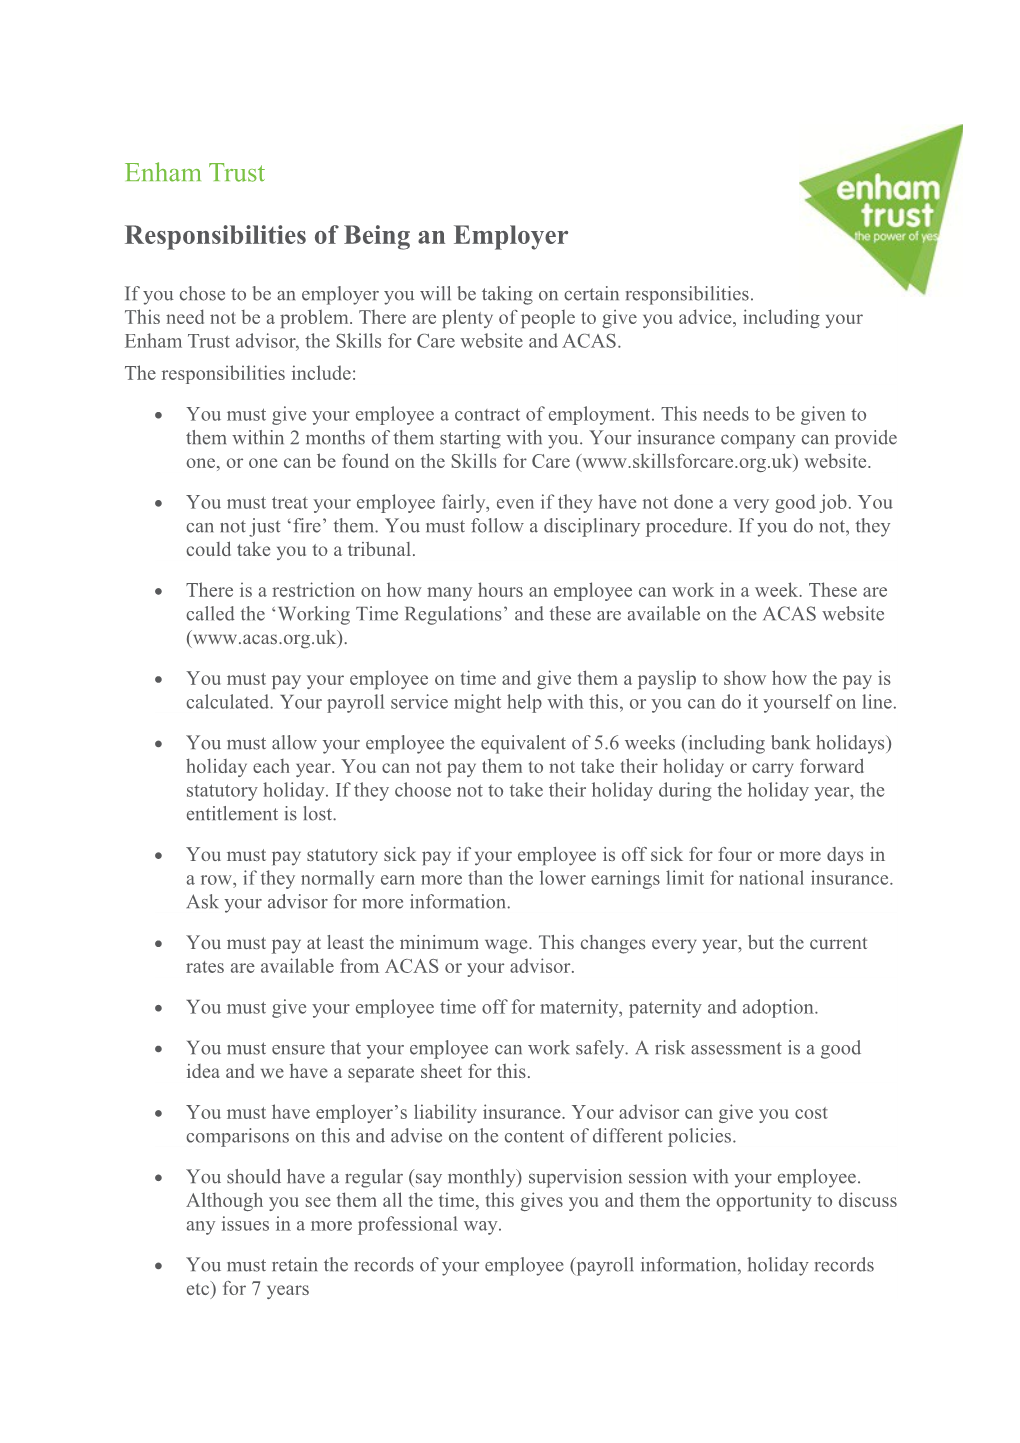 Responsibilities of Being an Employer